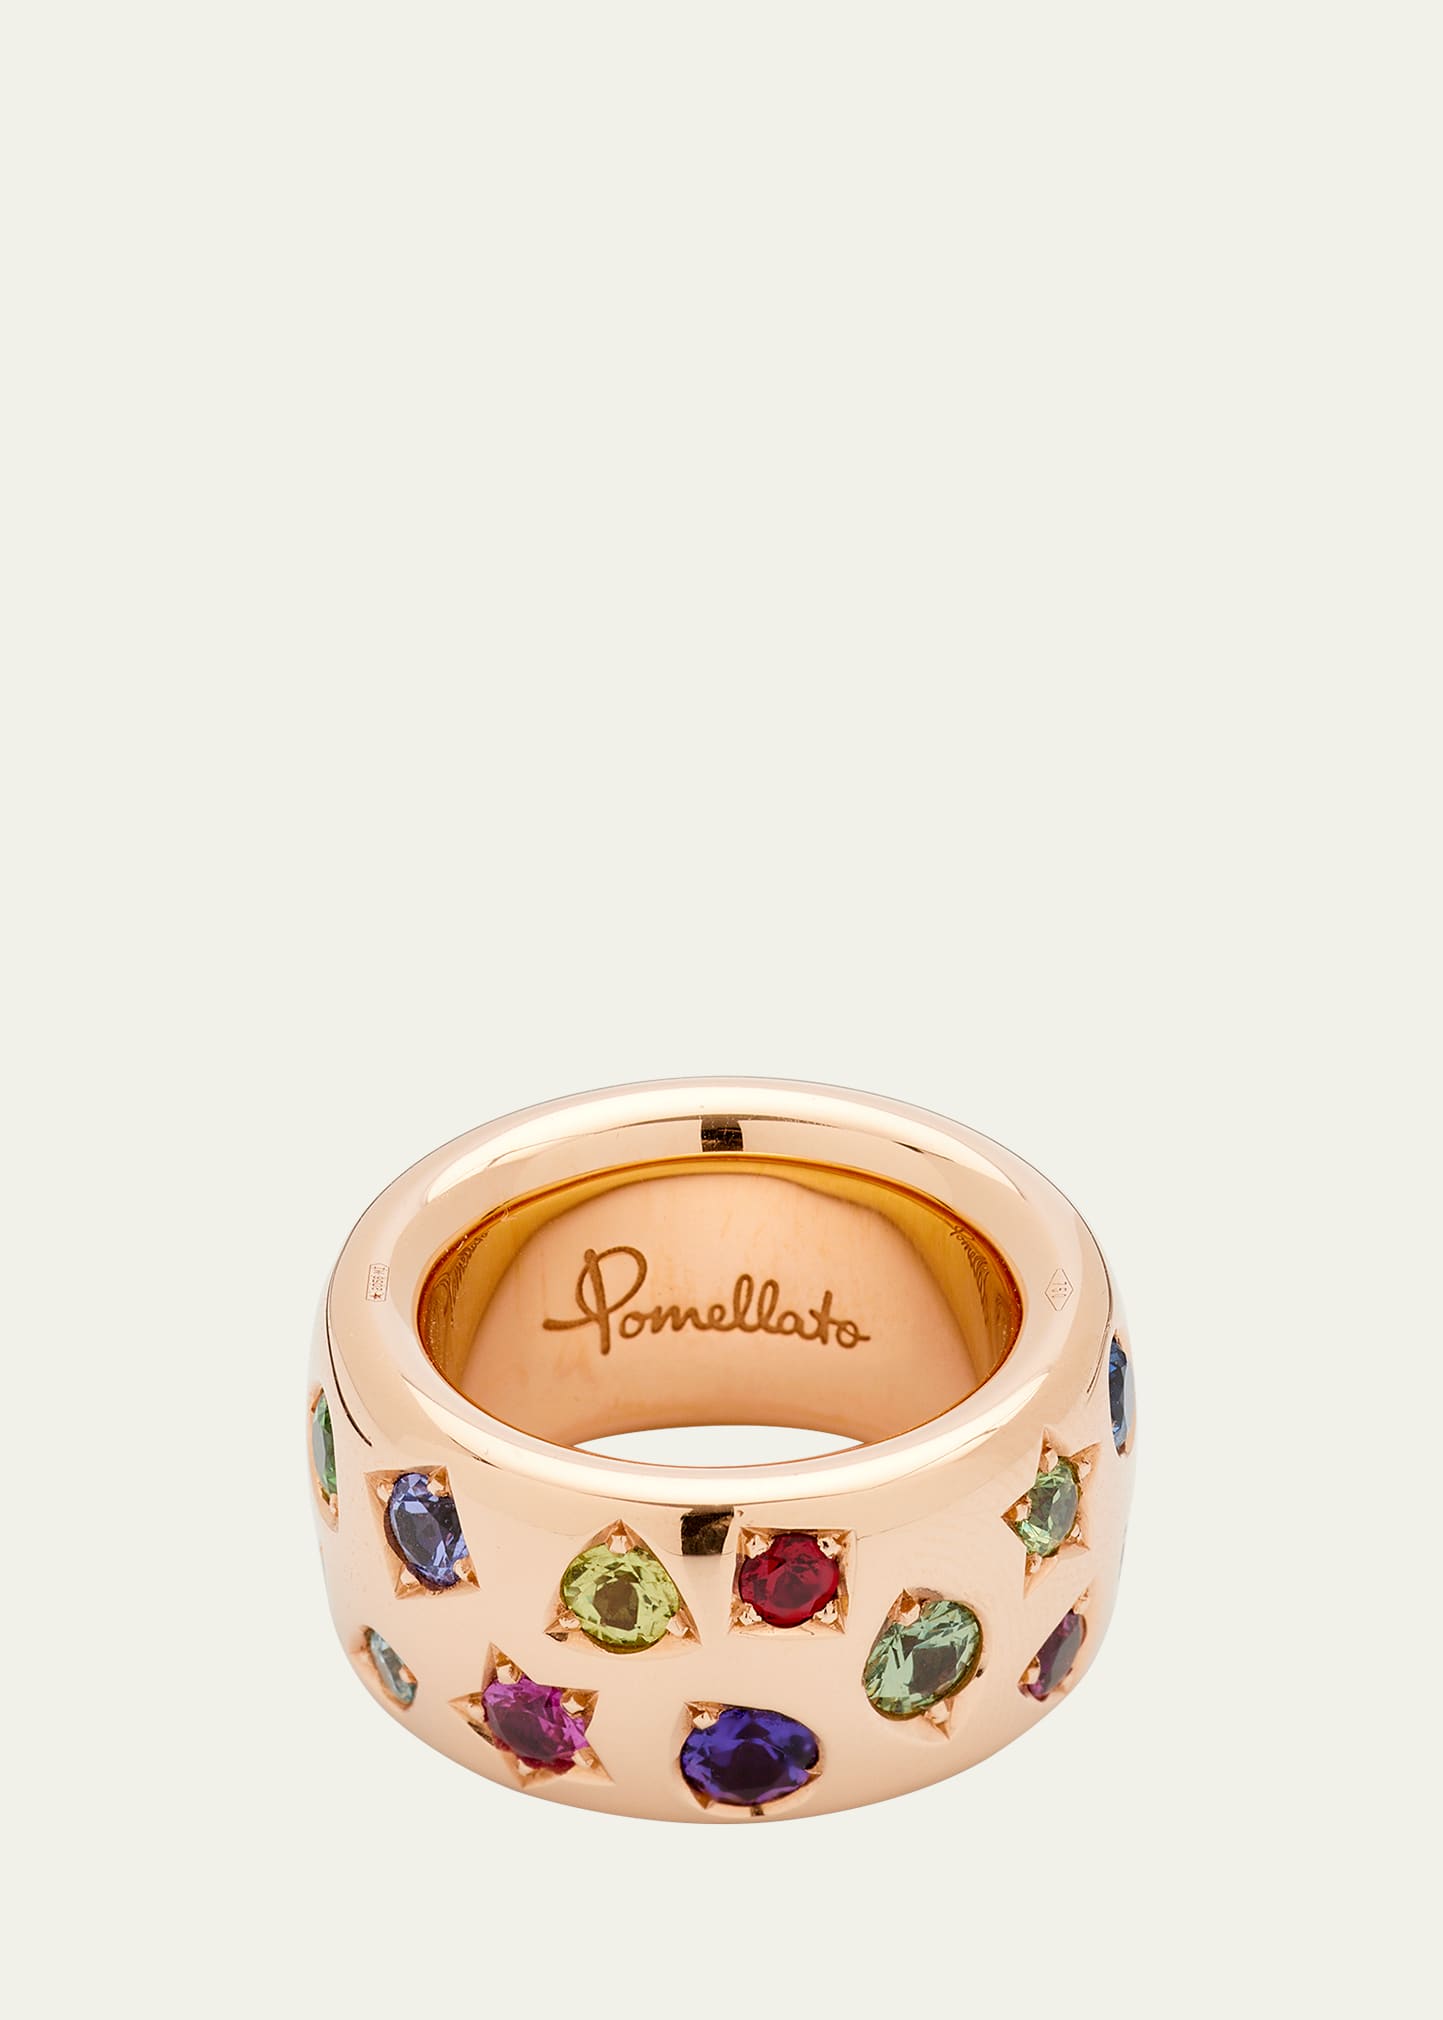 Iconica Maxi Ring in Rose Gold